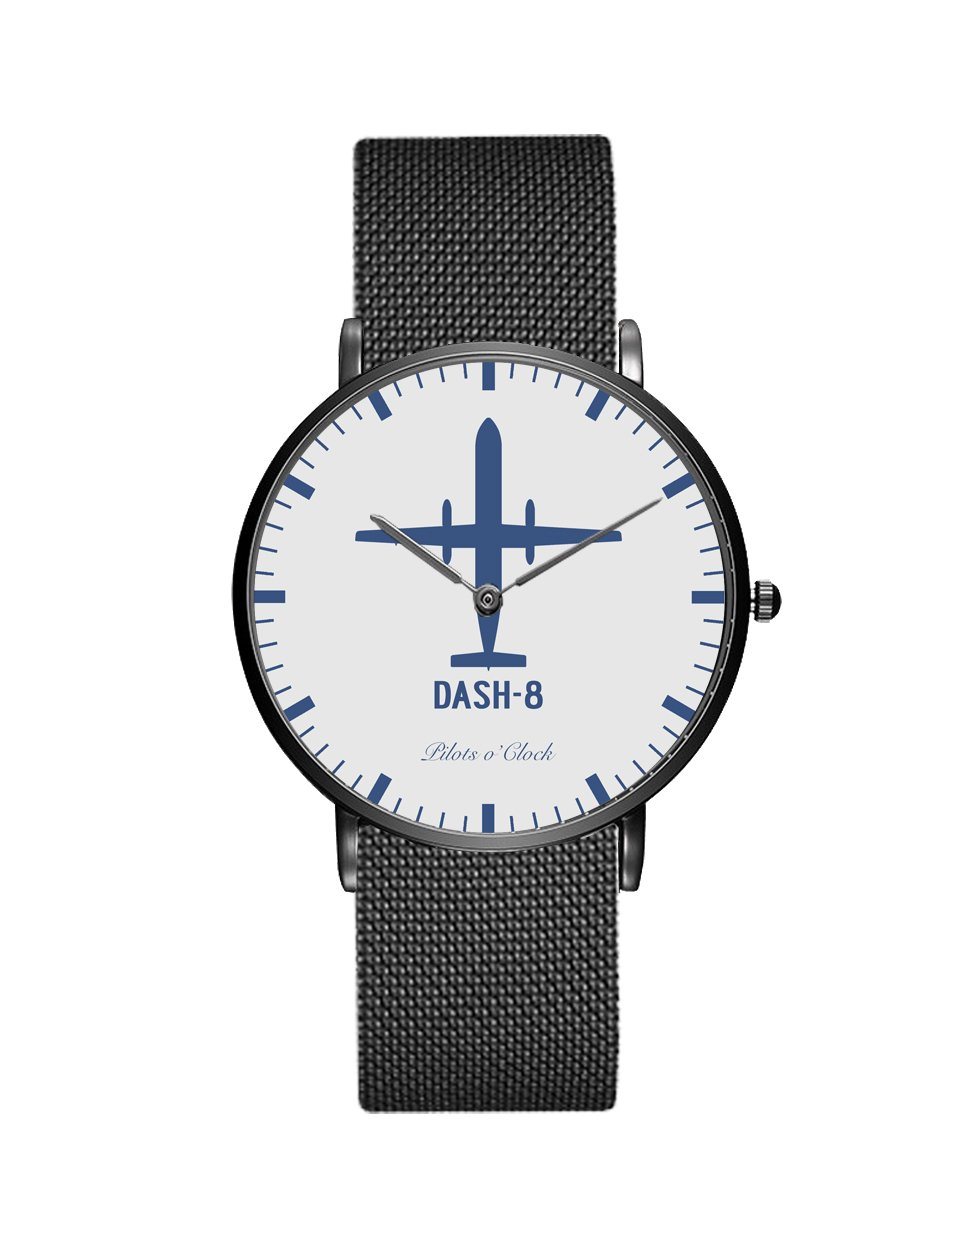 Bombardier Dash-8 Stainless Steel Strap Watches Pilot Eyes Store Black & Stainless Steel Strap 